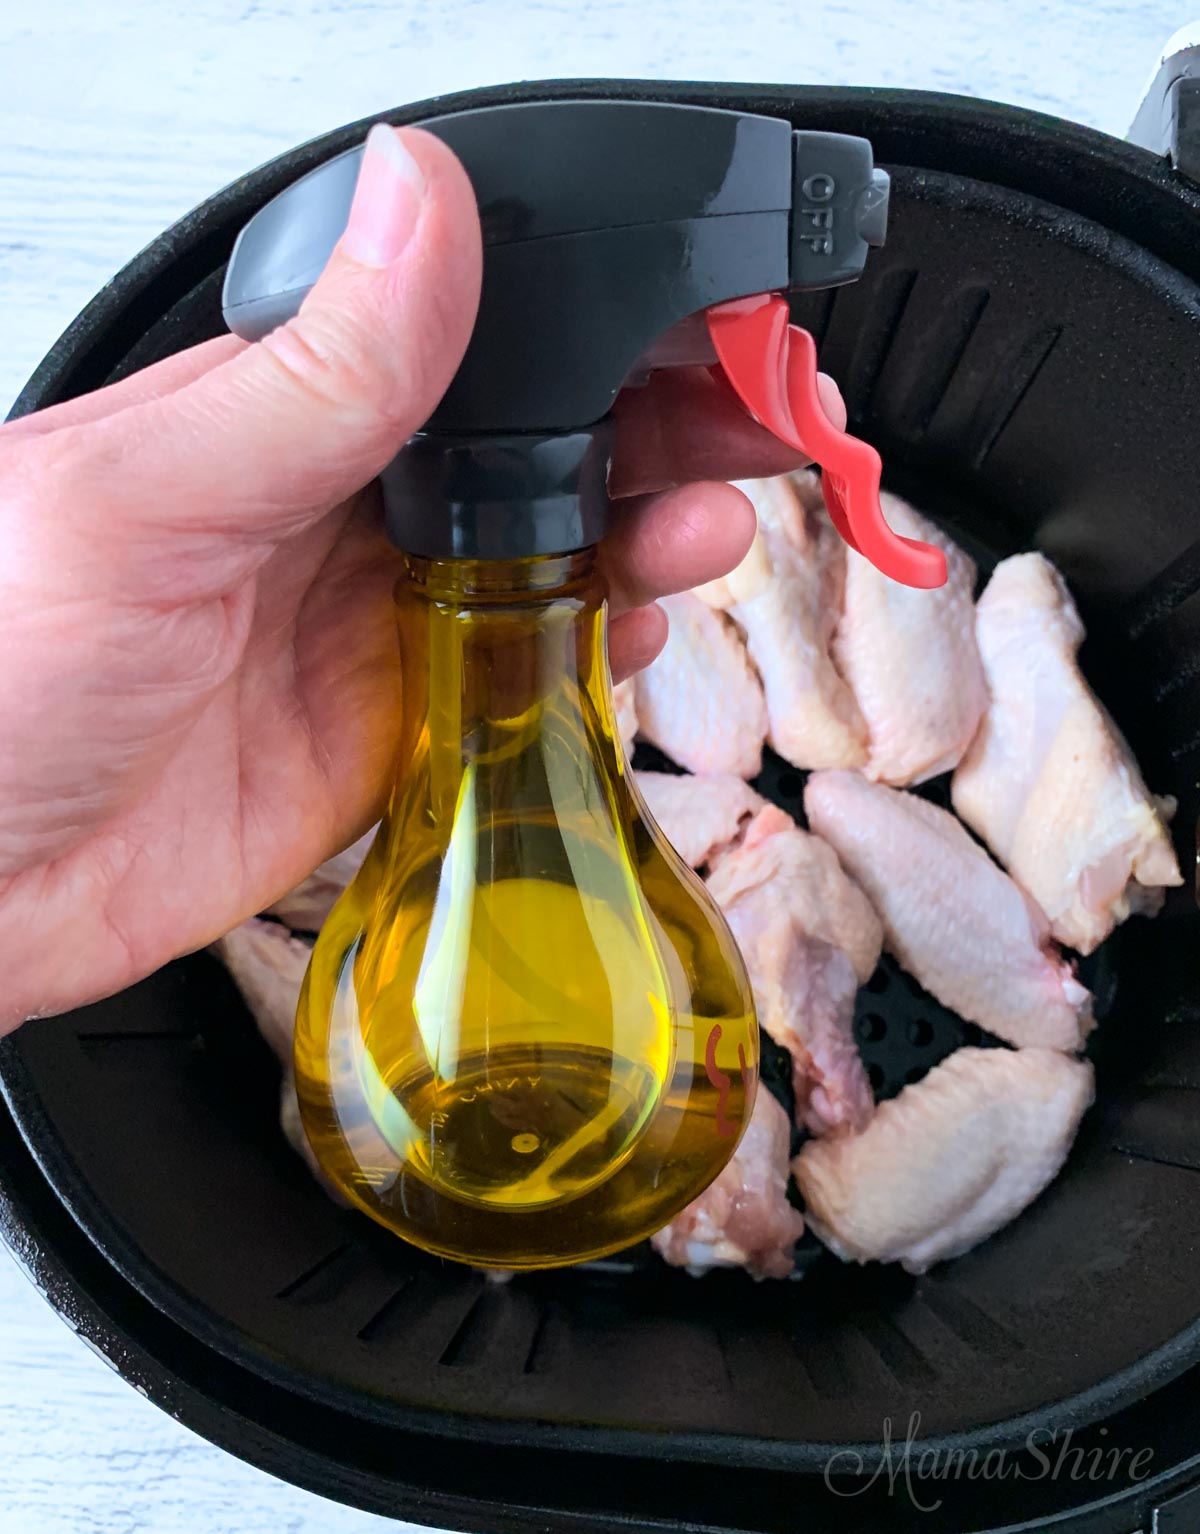 Oil spritzer to spray oil on foods for frying in an air fryer.